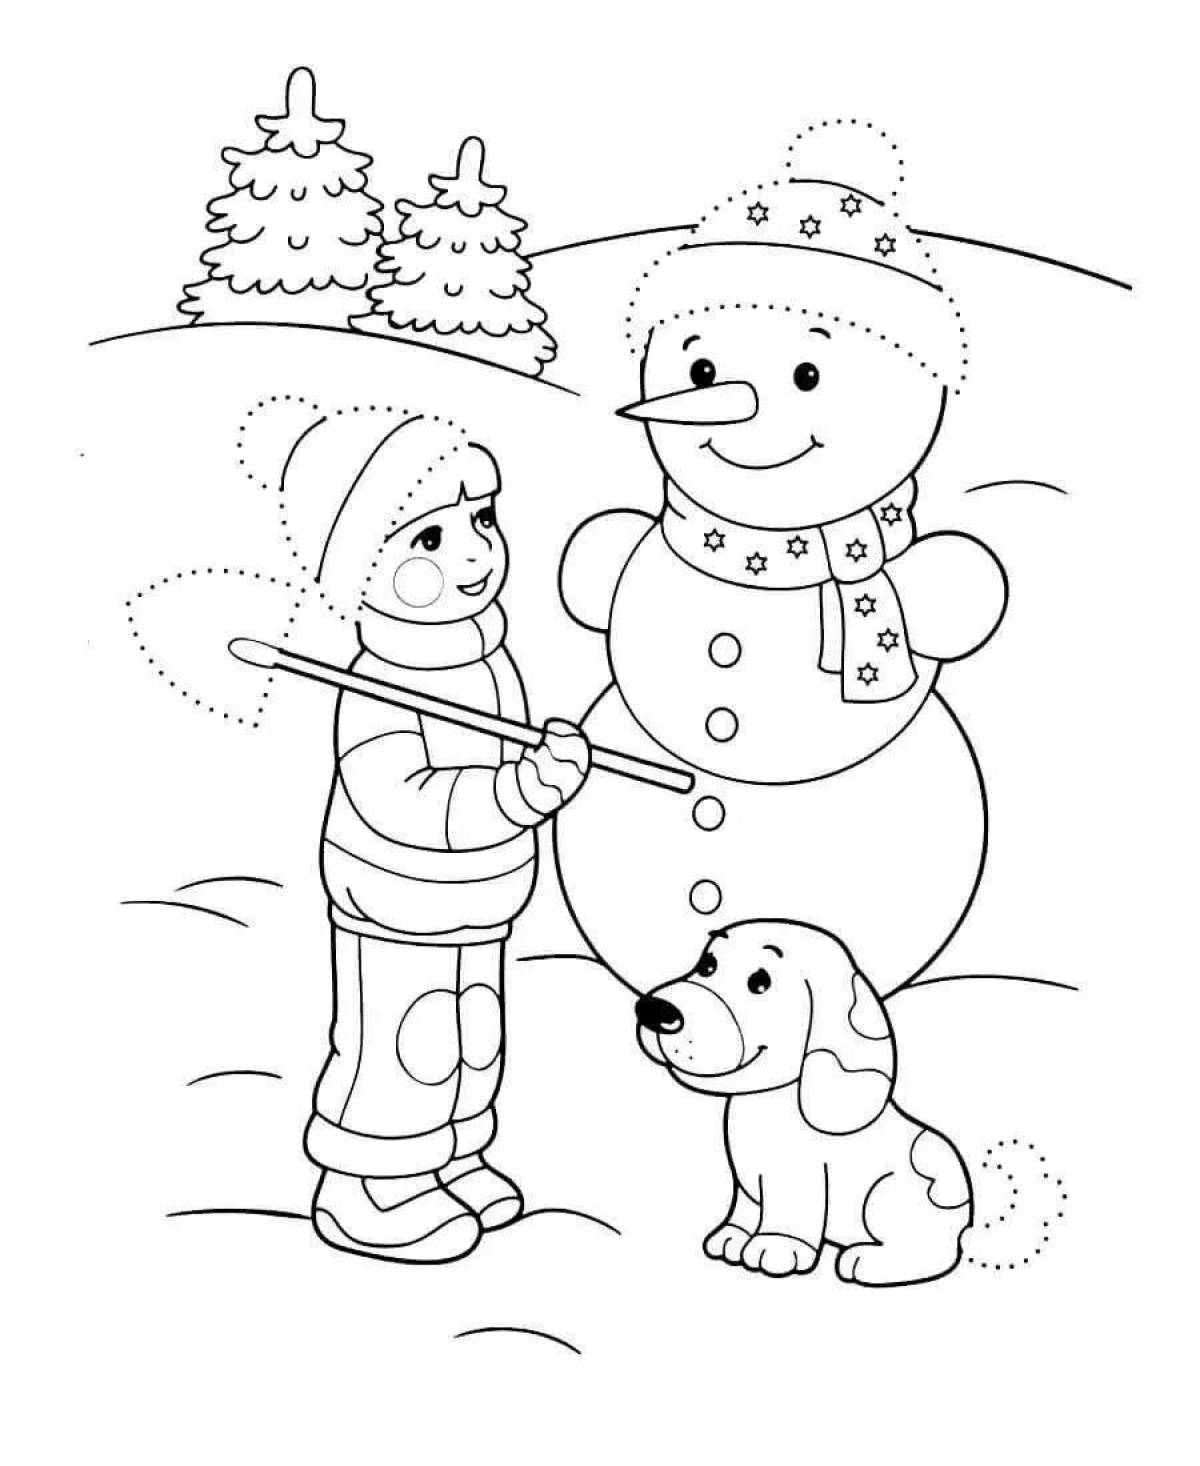 Funny winter coloring book for kids 6-7 years old